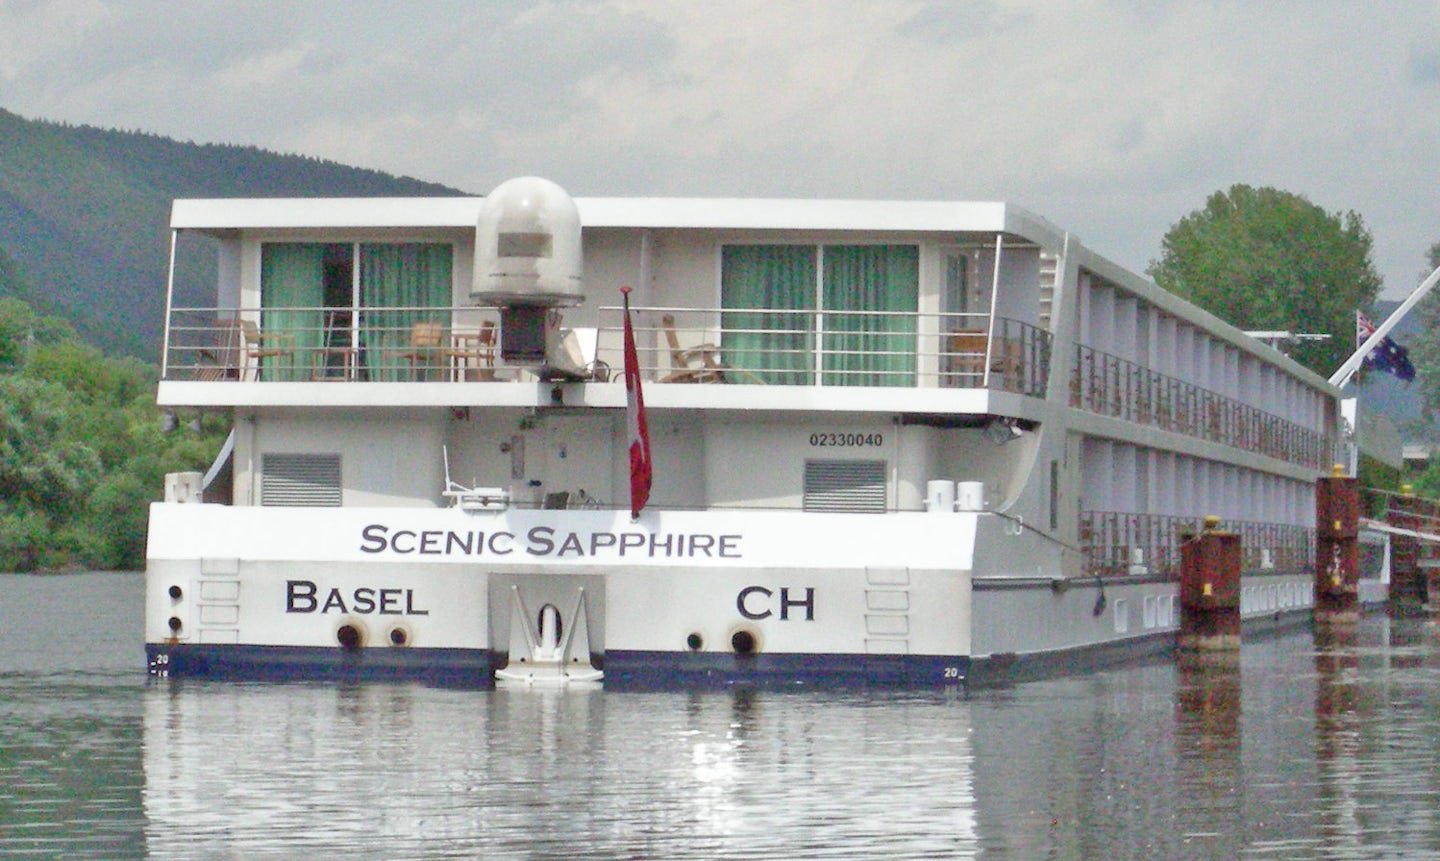 Scenic Sapphire from the back